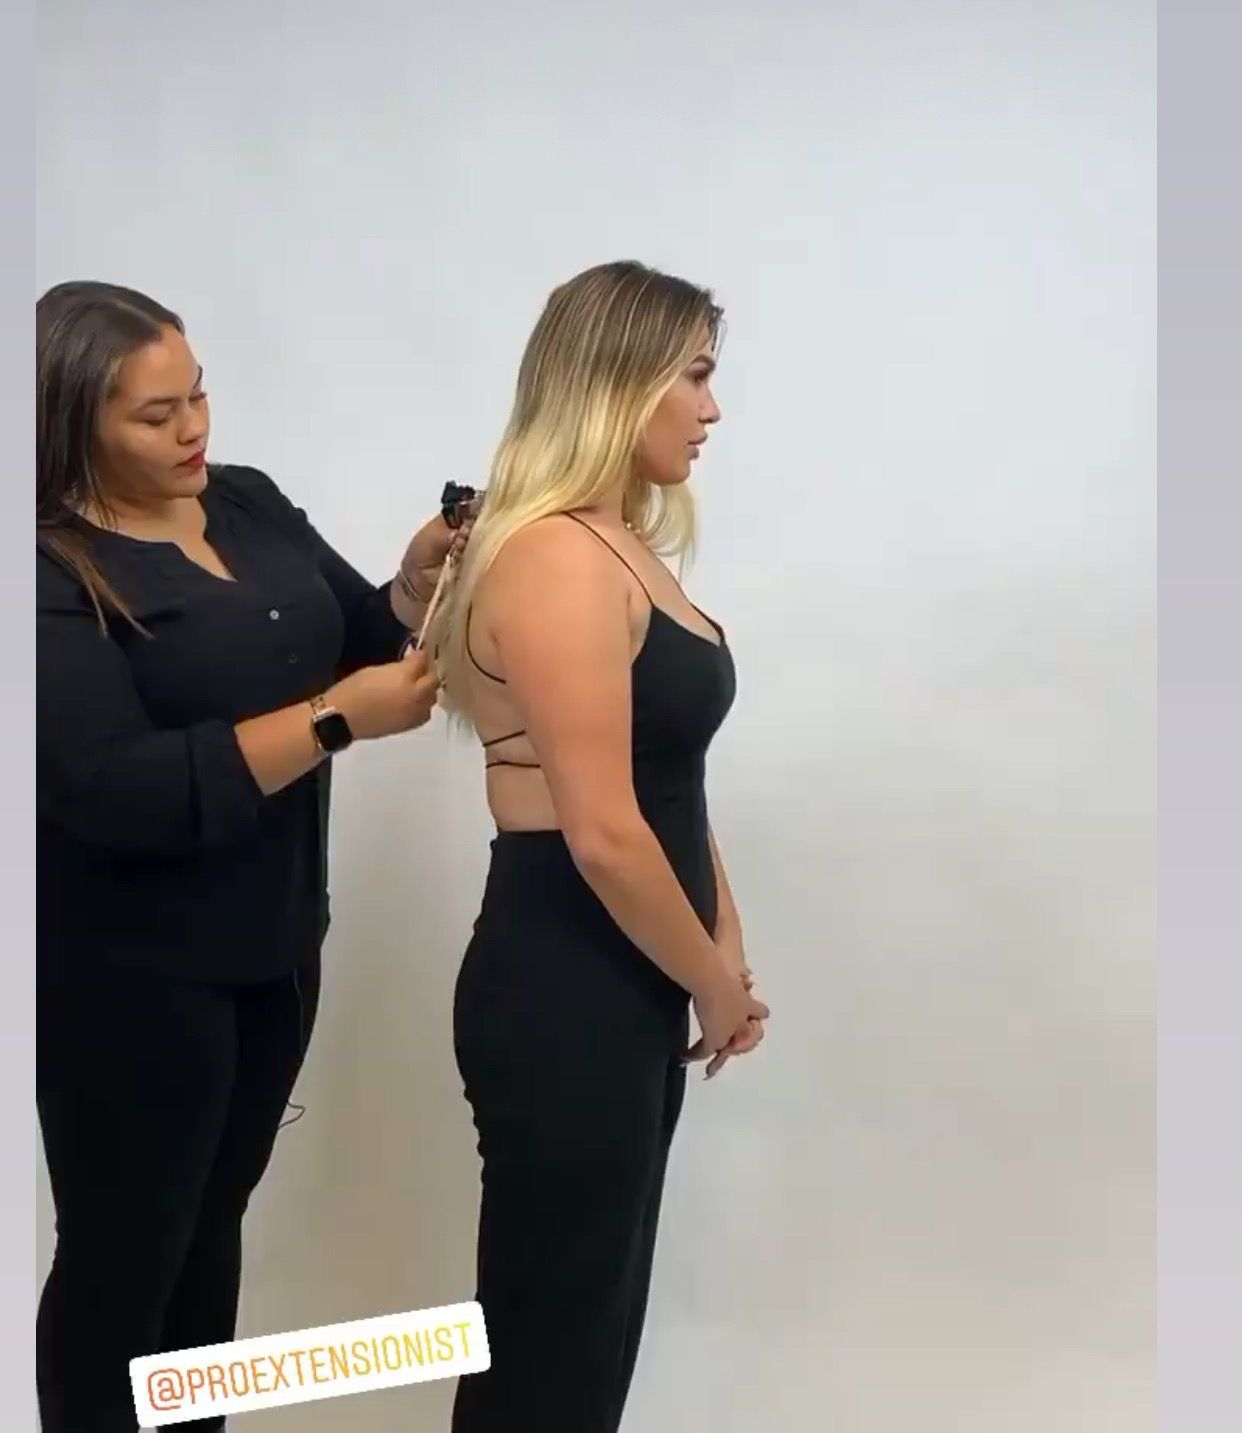 a woman in a black dress is getting her hair done by another woman .